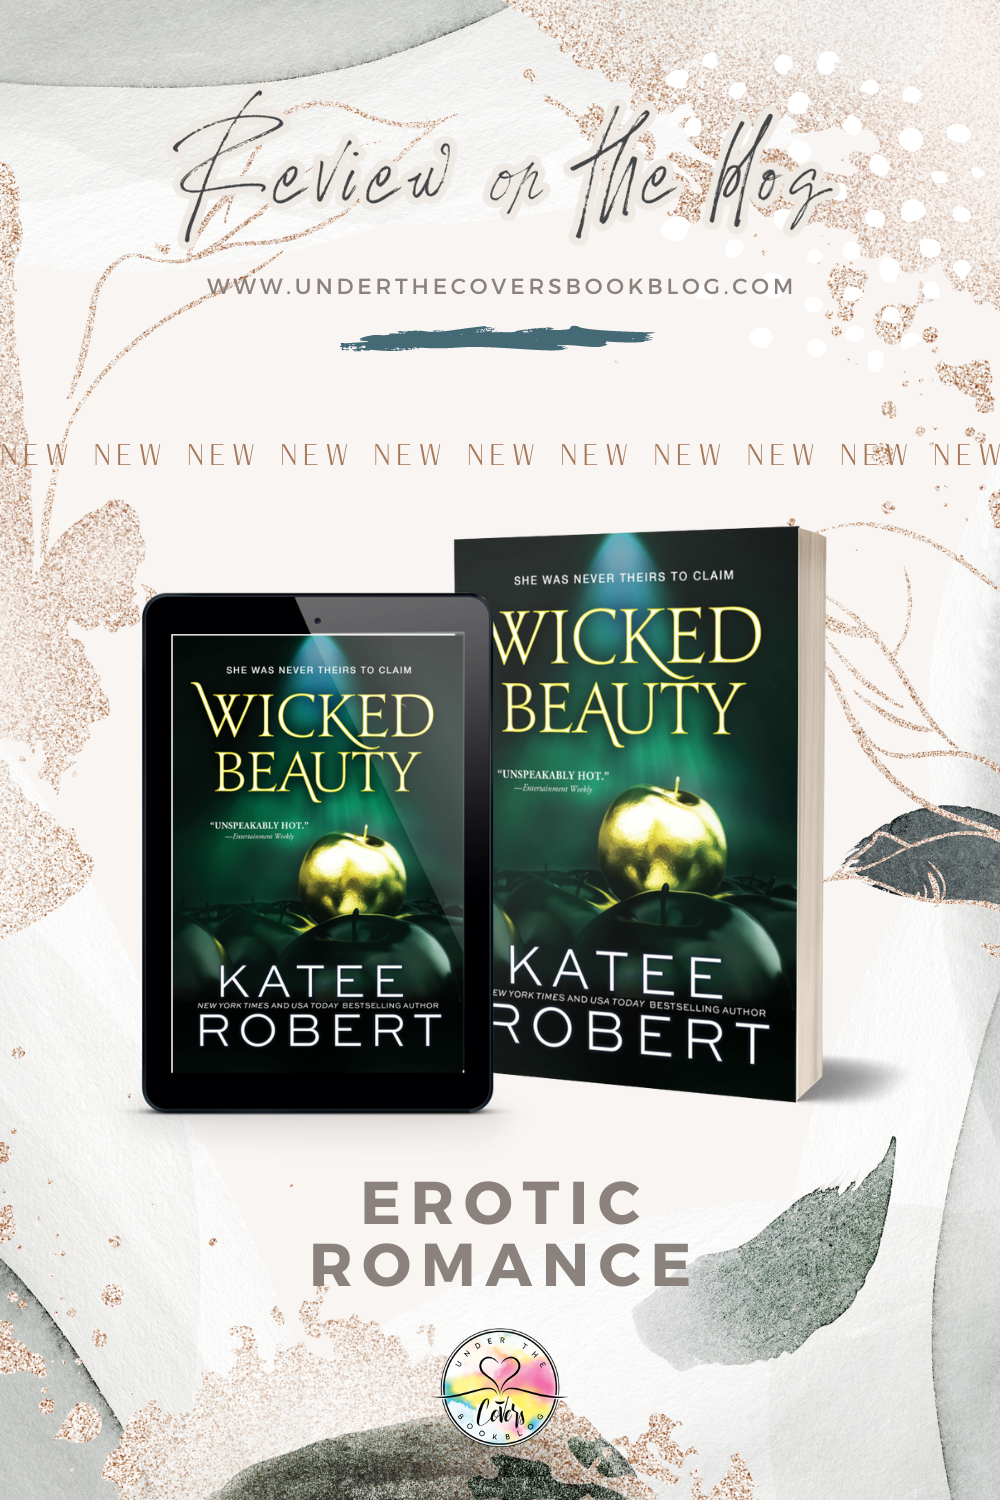 ARC Review: Wicked Beauty by Katee Robert